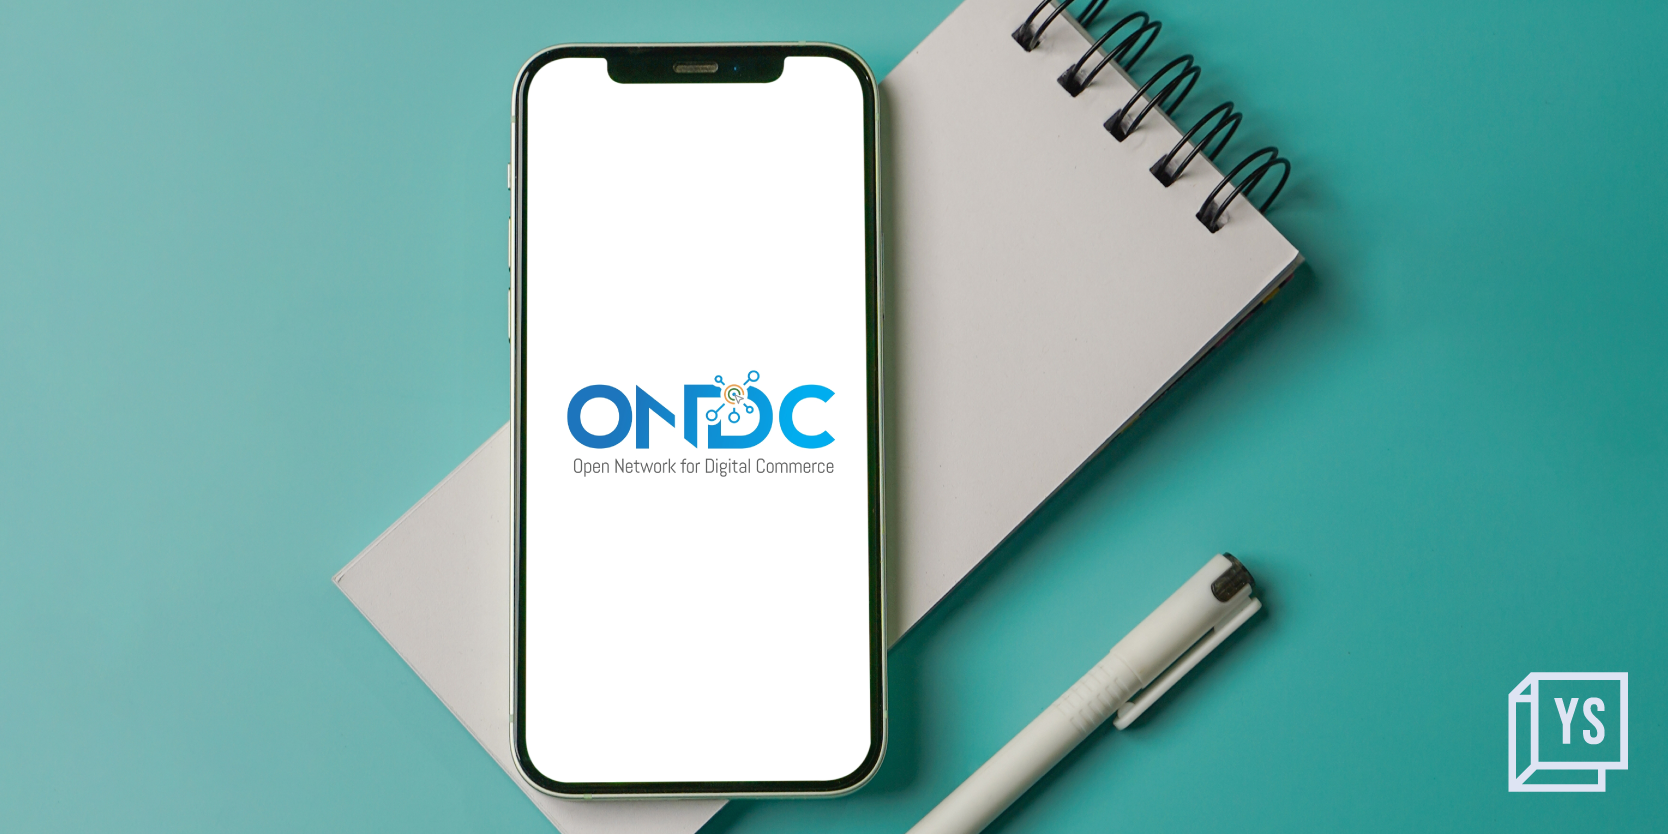 ONDC is a revolution live in action